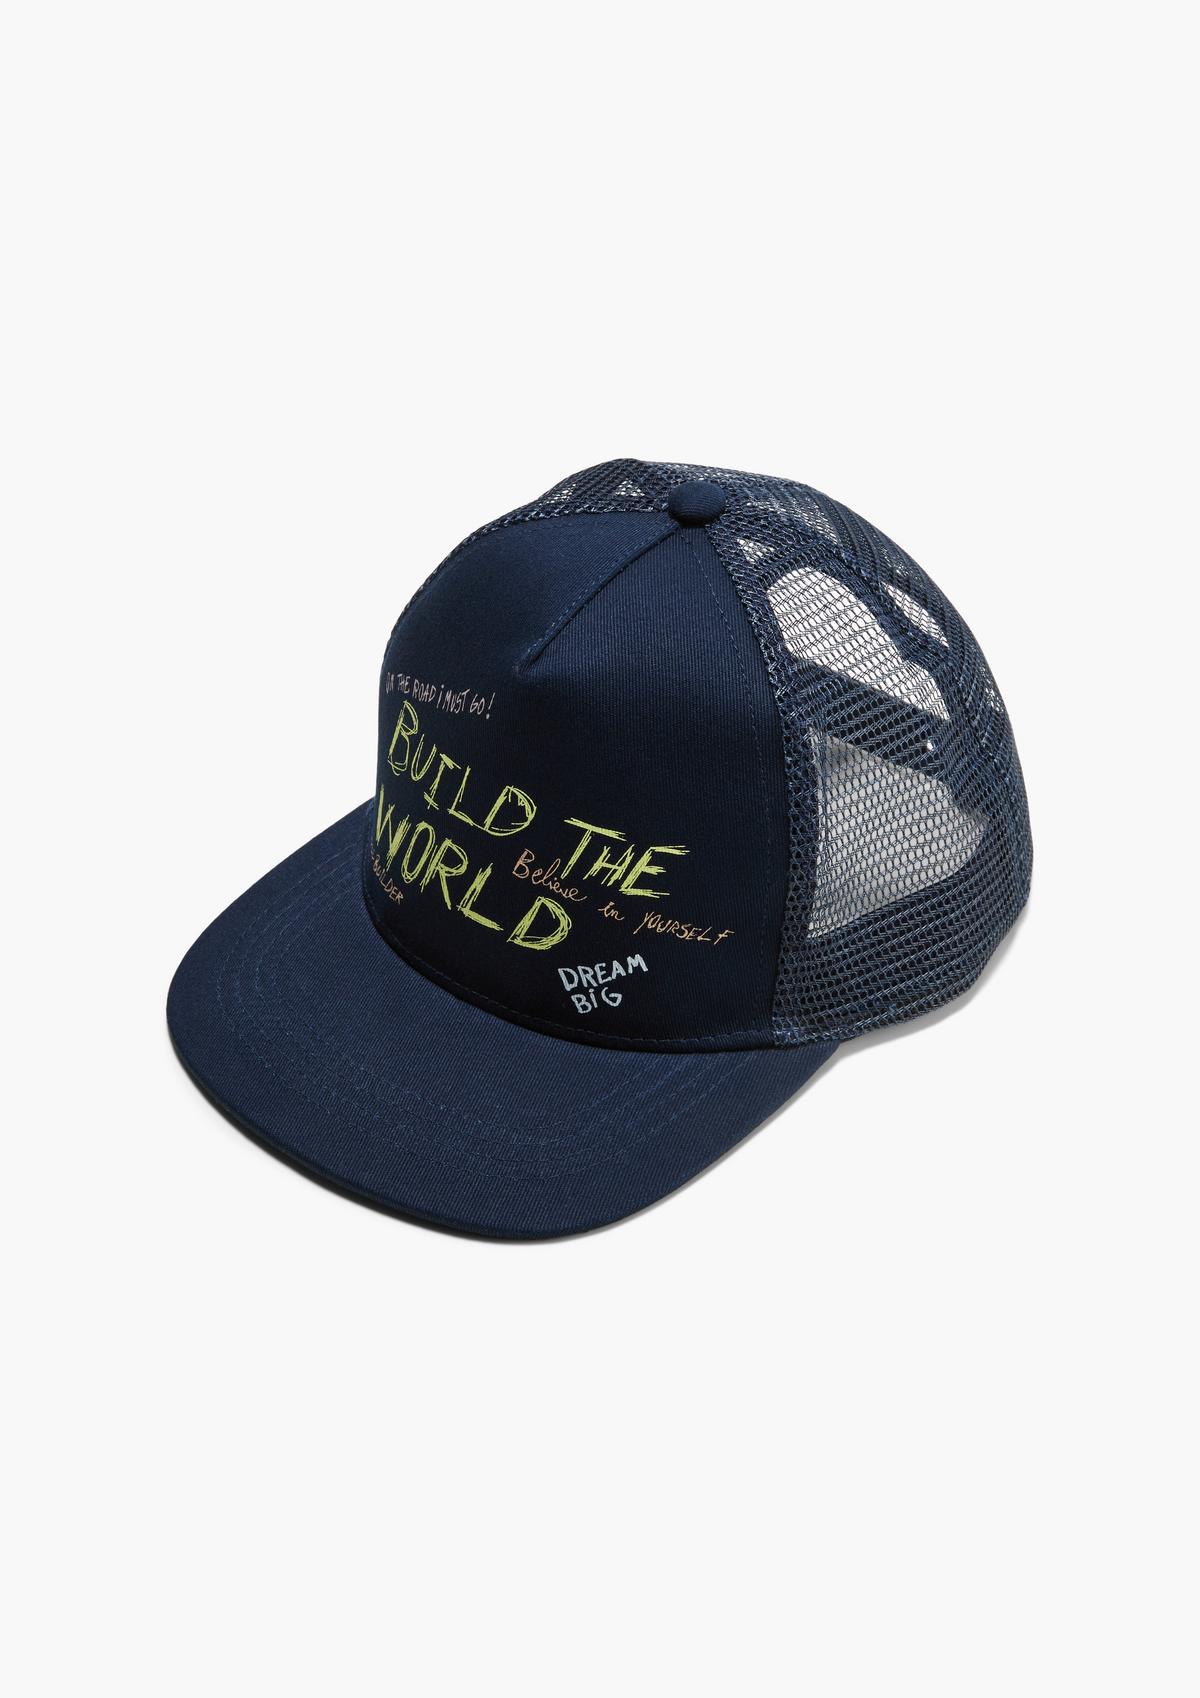 s.Oliver Trucker cap with front print